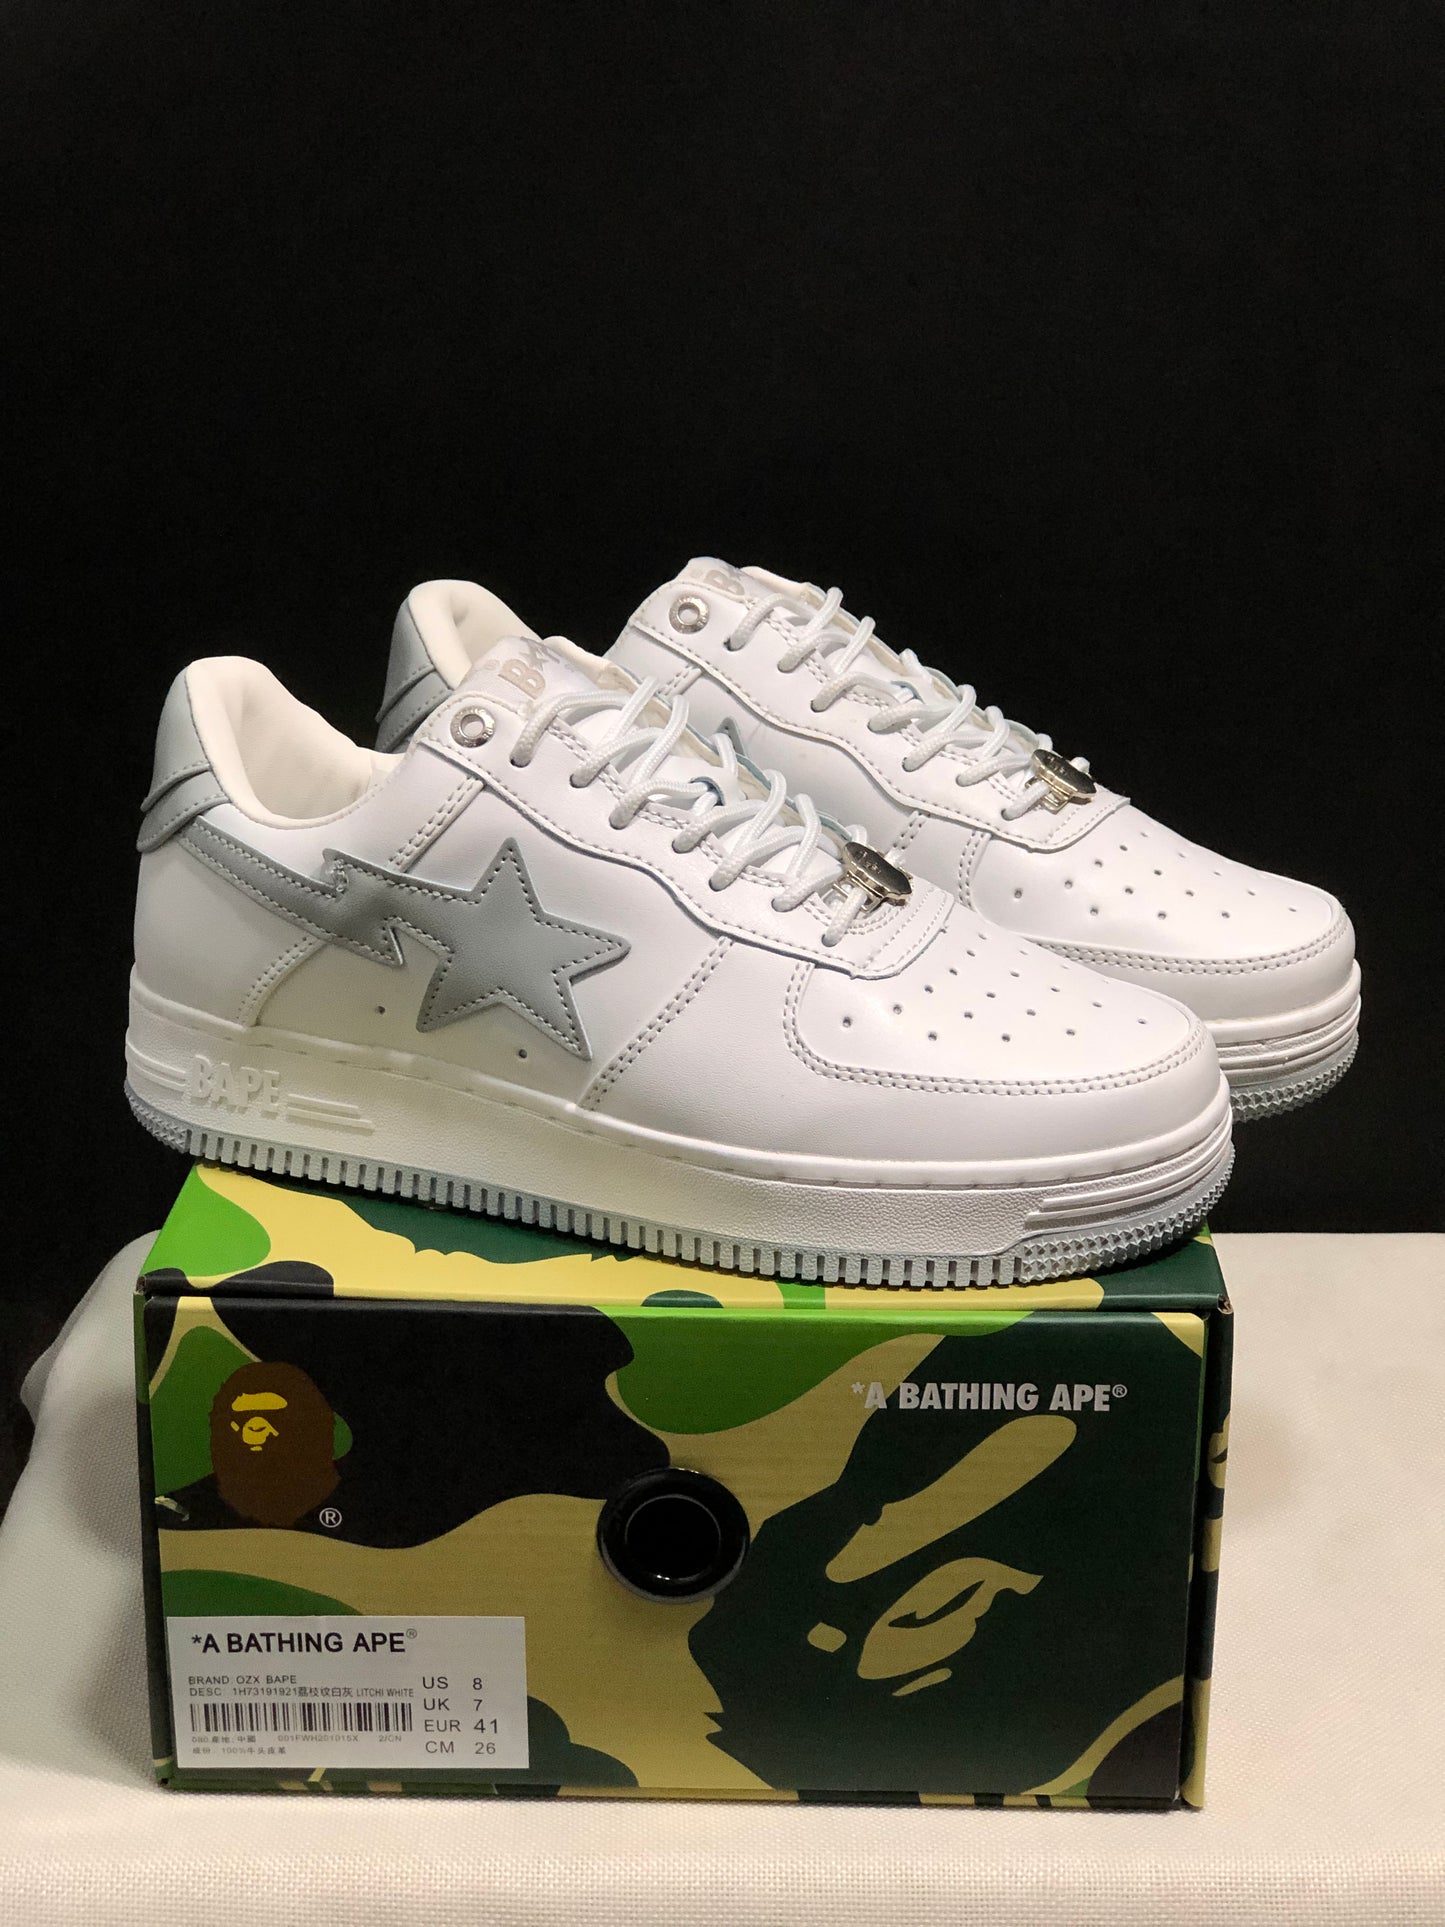 BAPE STA - Patent Leather White with Gray Star